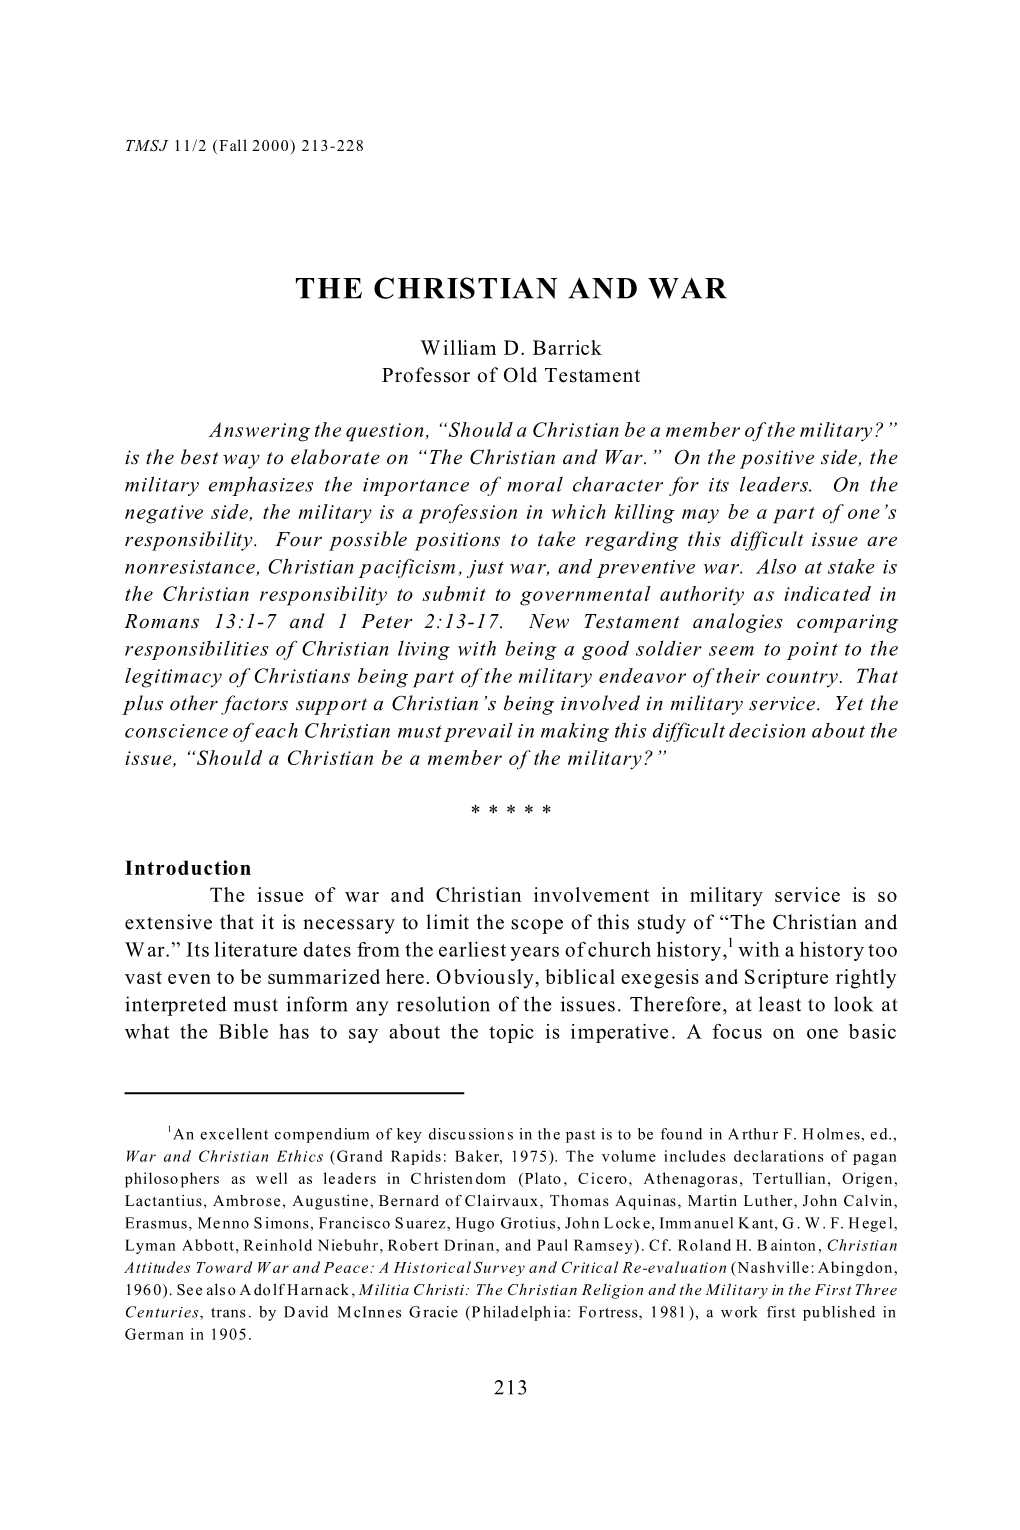 The Christian and War